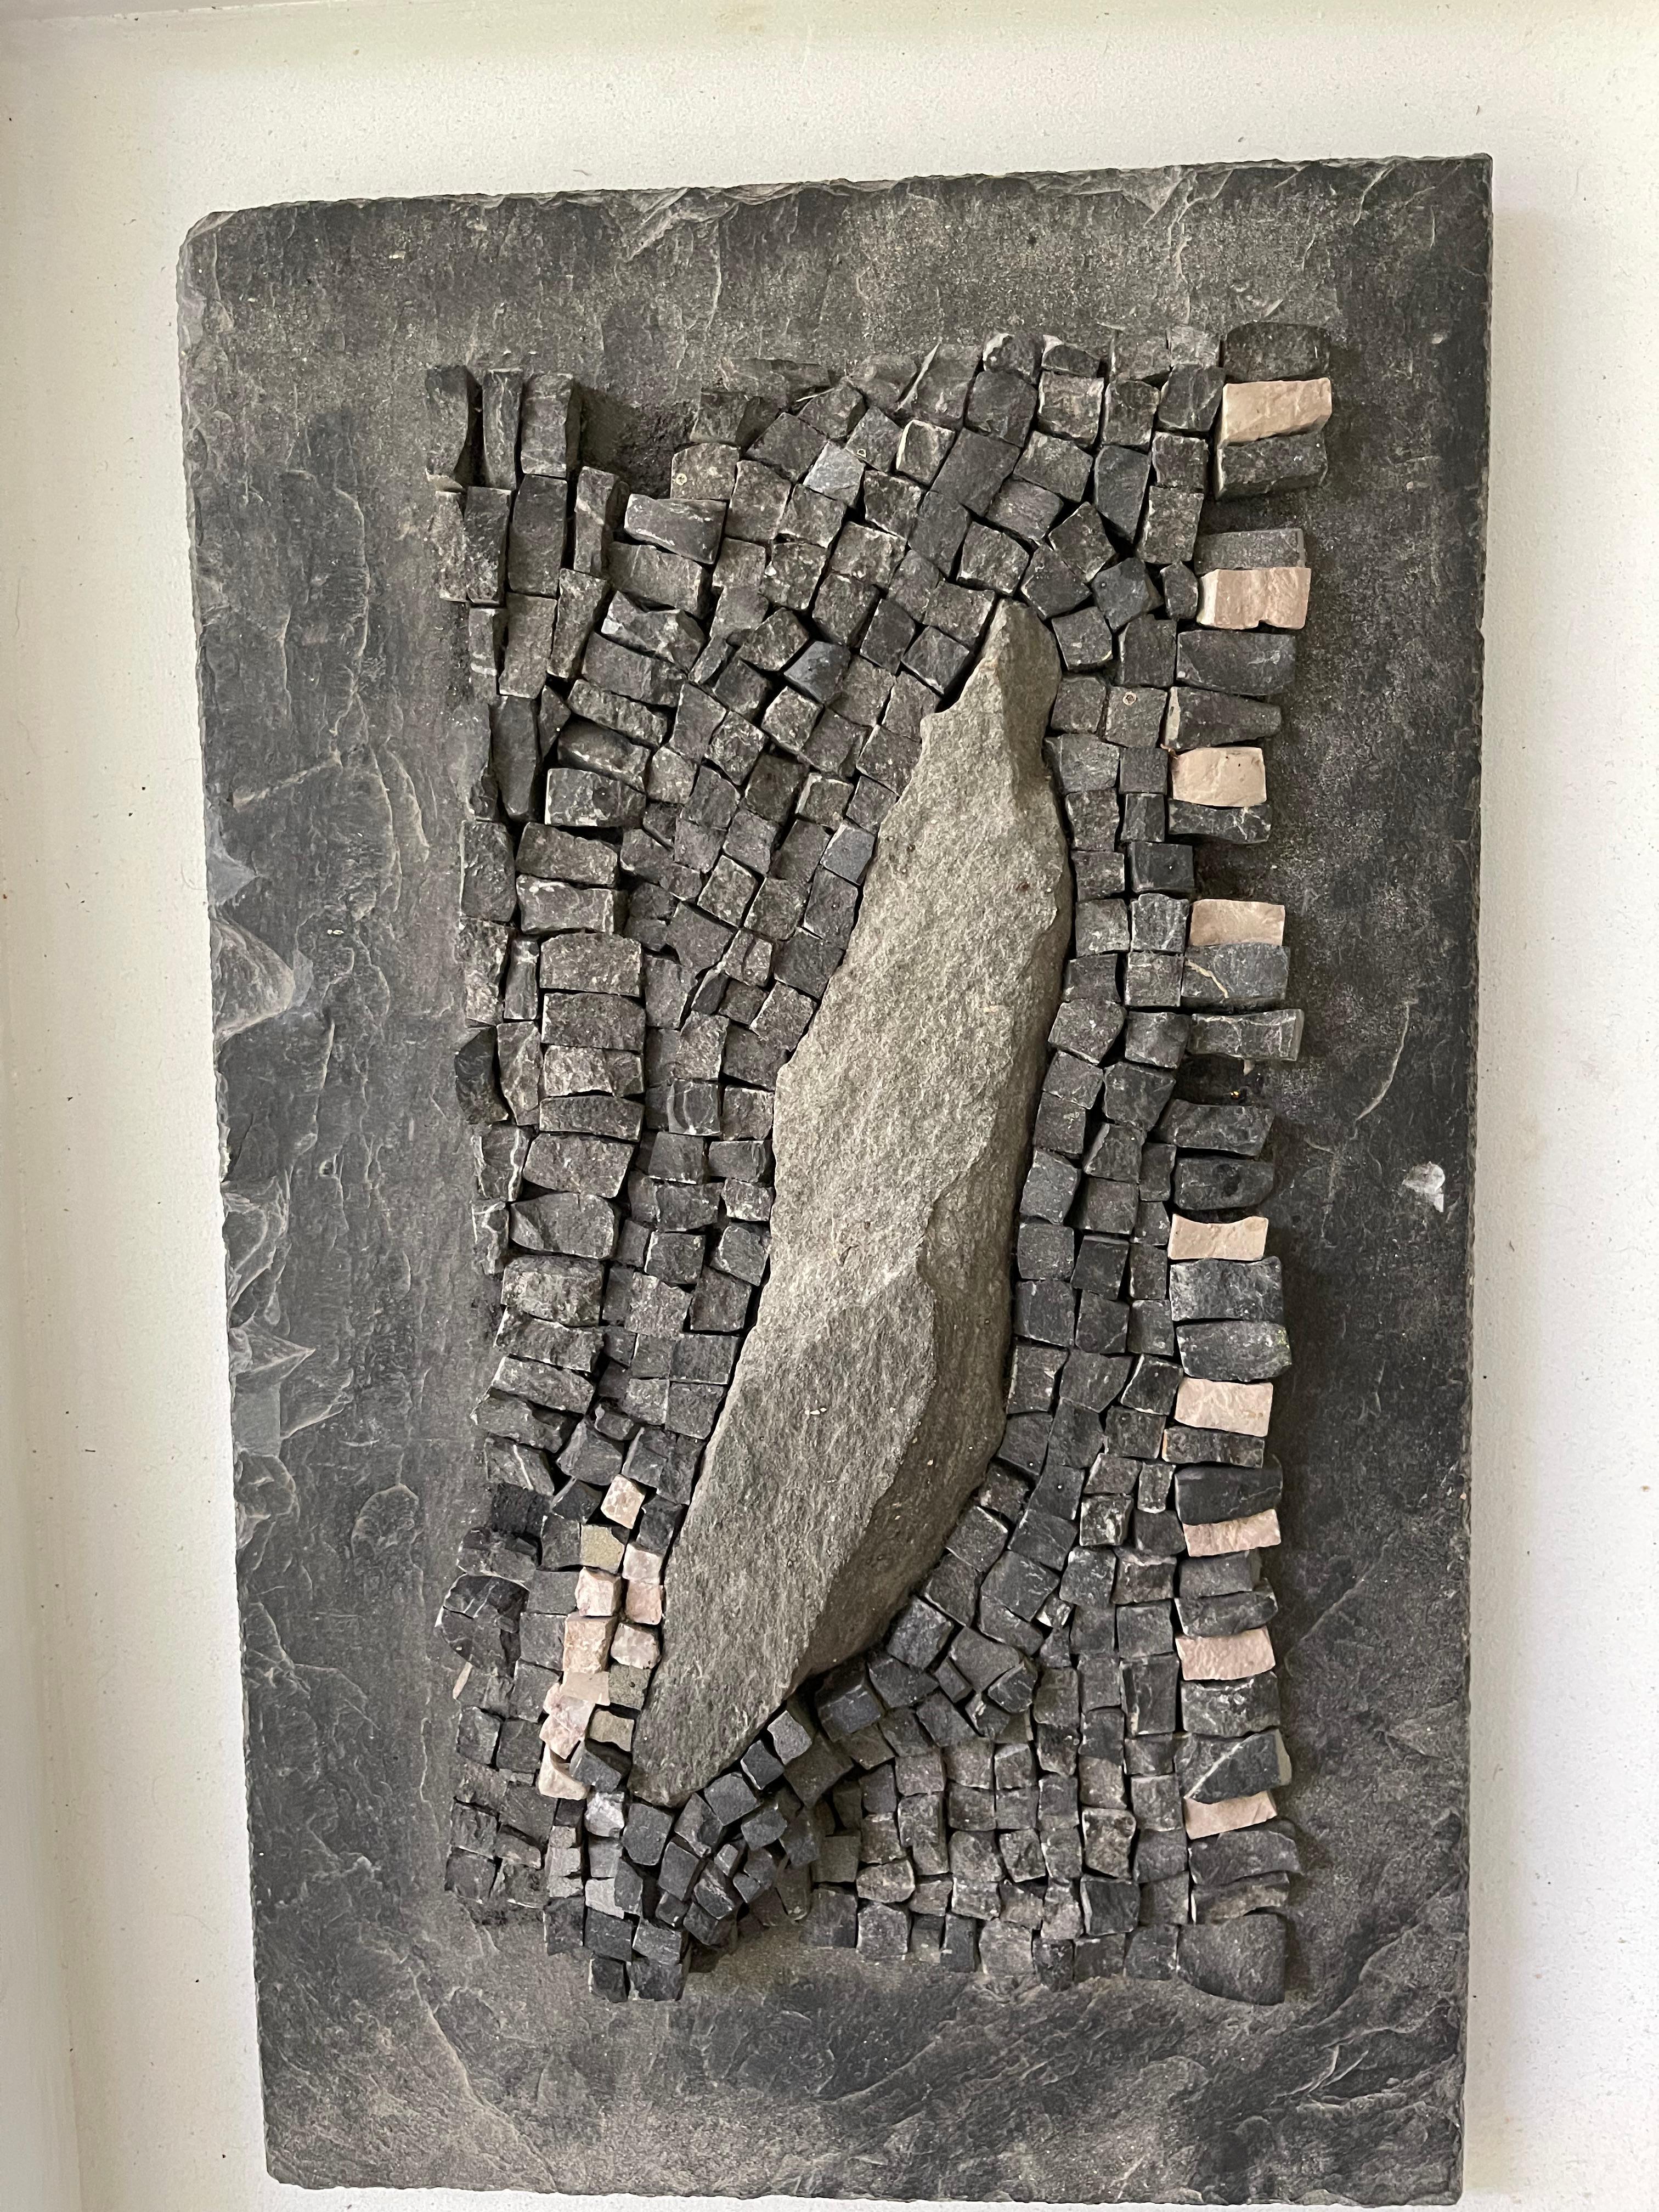 Abstract slate sandstone composition by Nicole Cormier (1932-2020)
Provenance from the artist atelier.